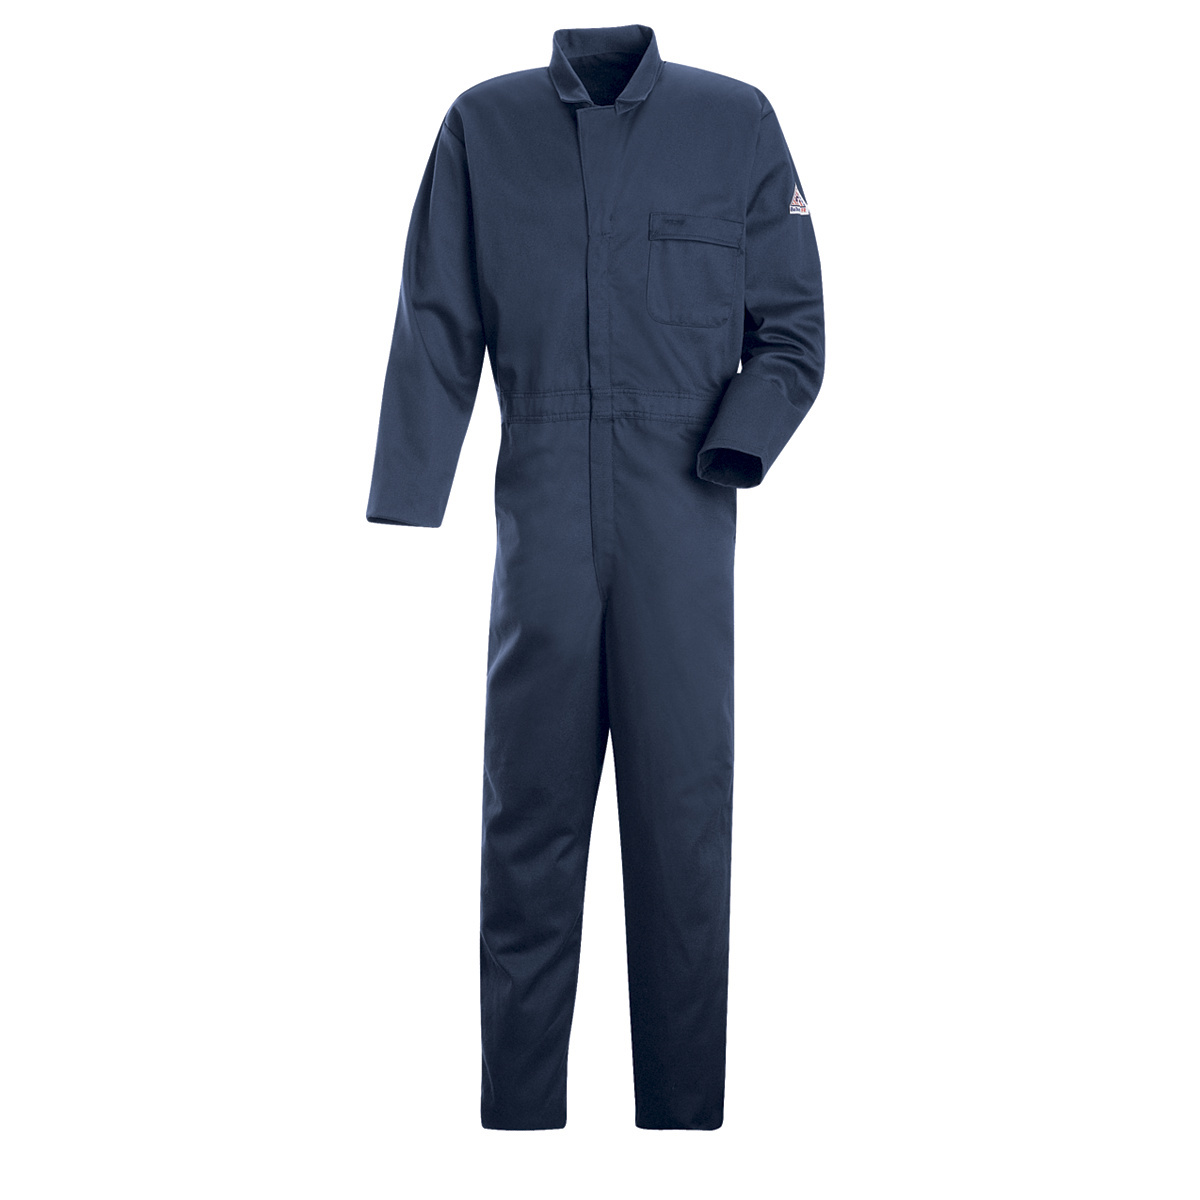 Bulwark® 4X Regular Navy Blue EXCEL FR® Twill Cotton Flame Resistant Coveralls With Zipper Front Closure